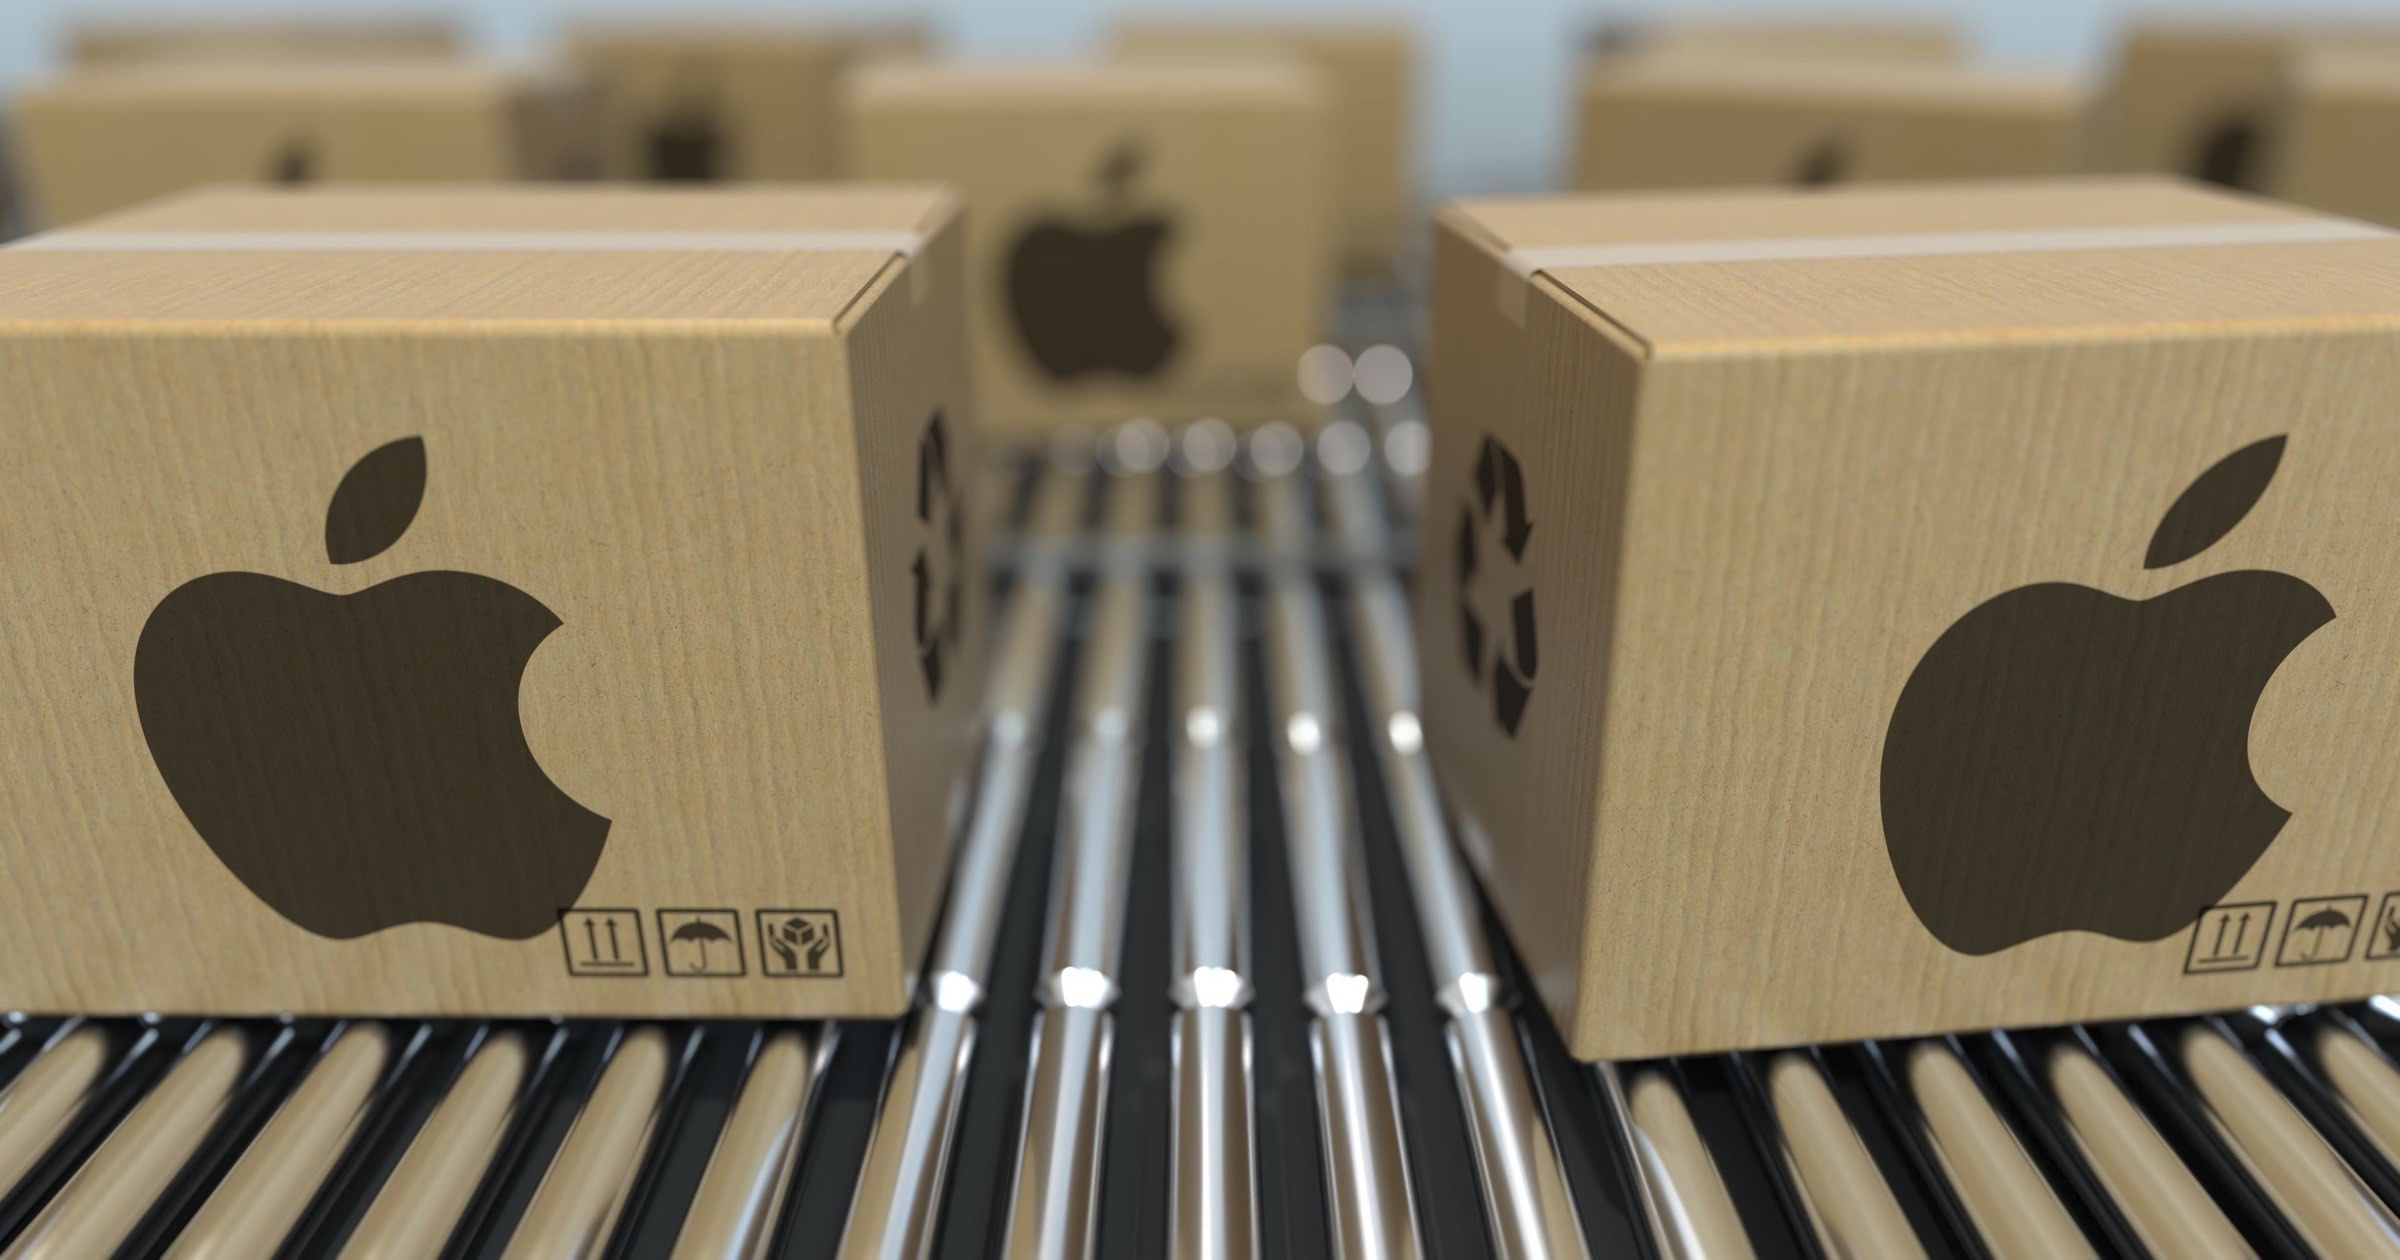 Apple cardboard boxes on assembly line.